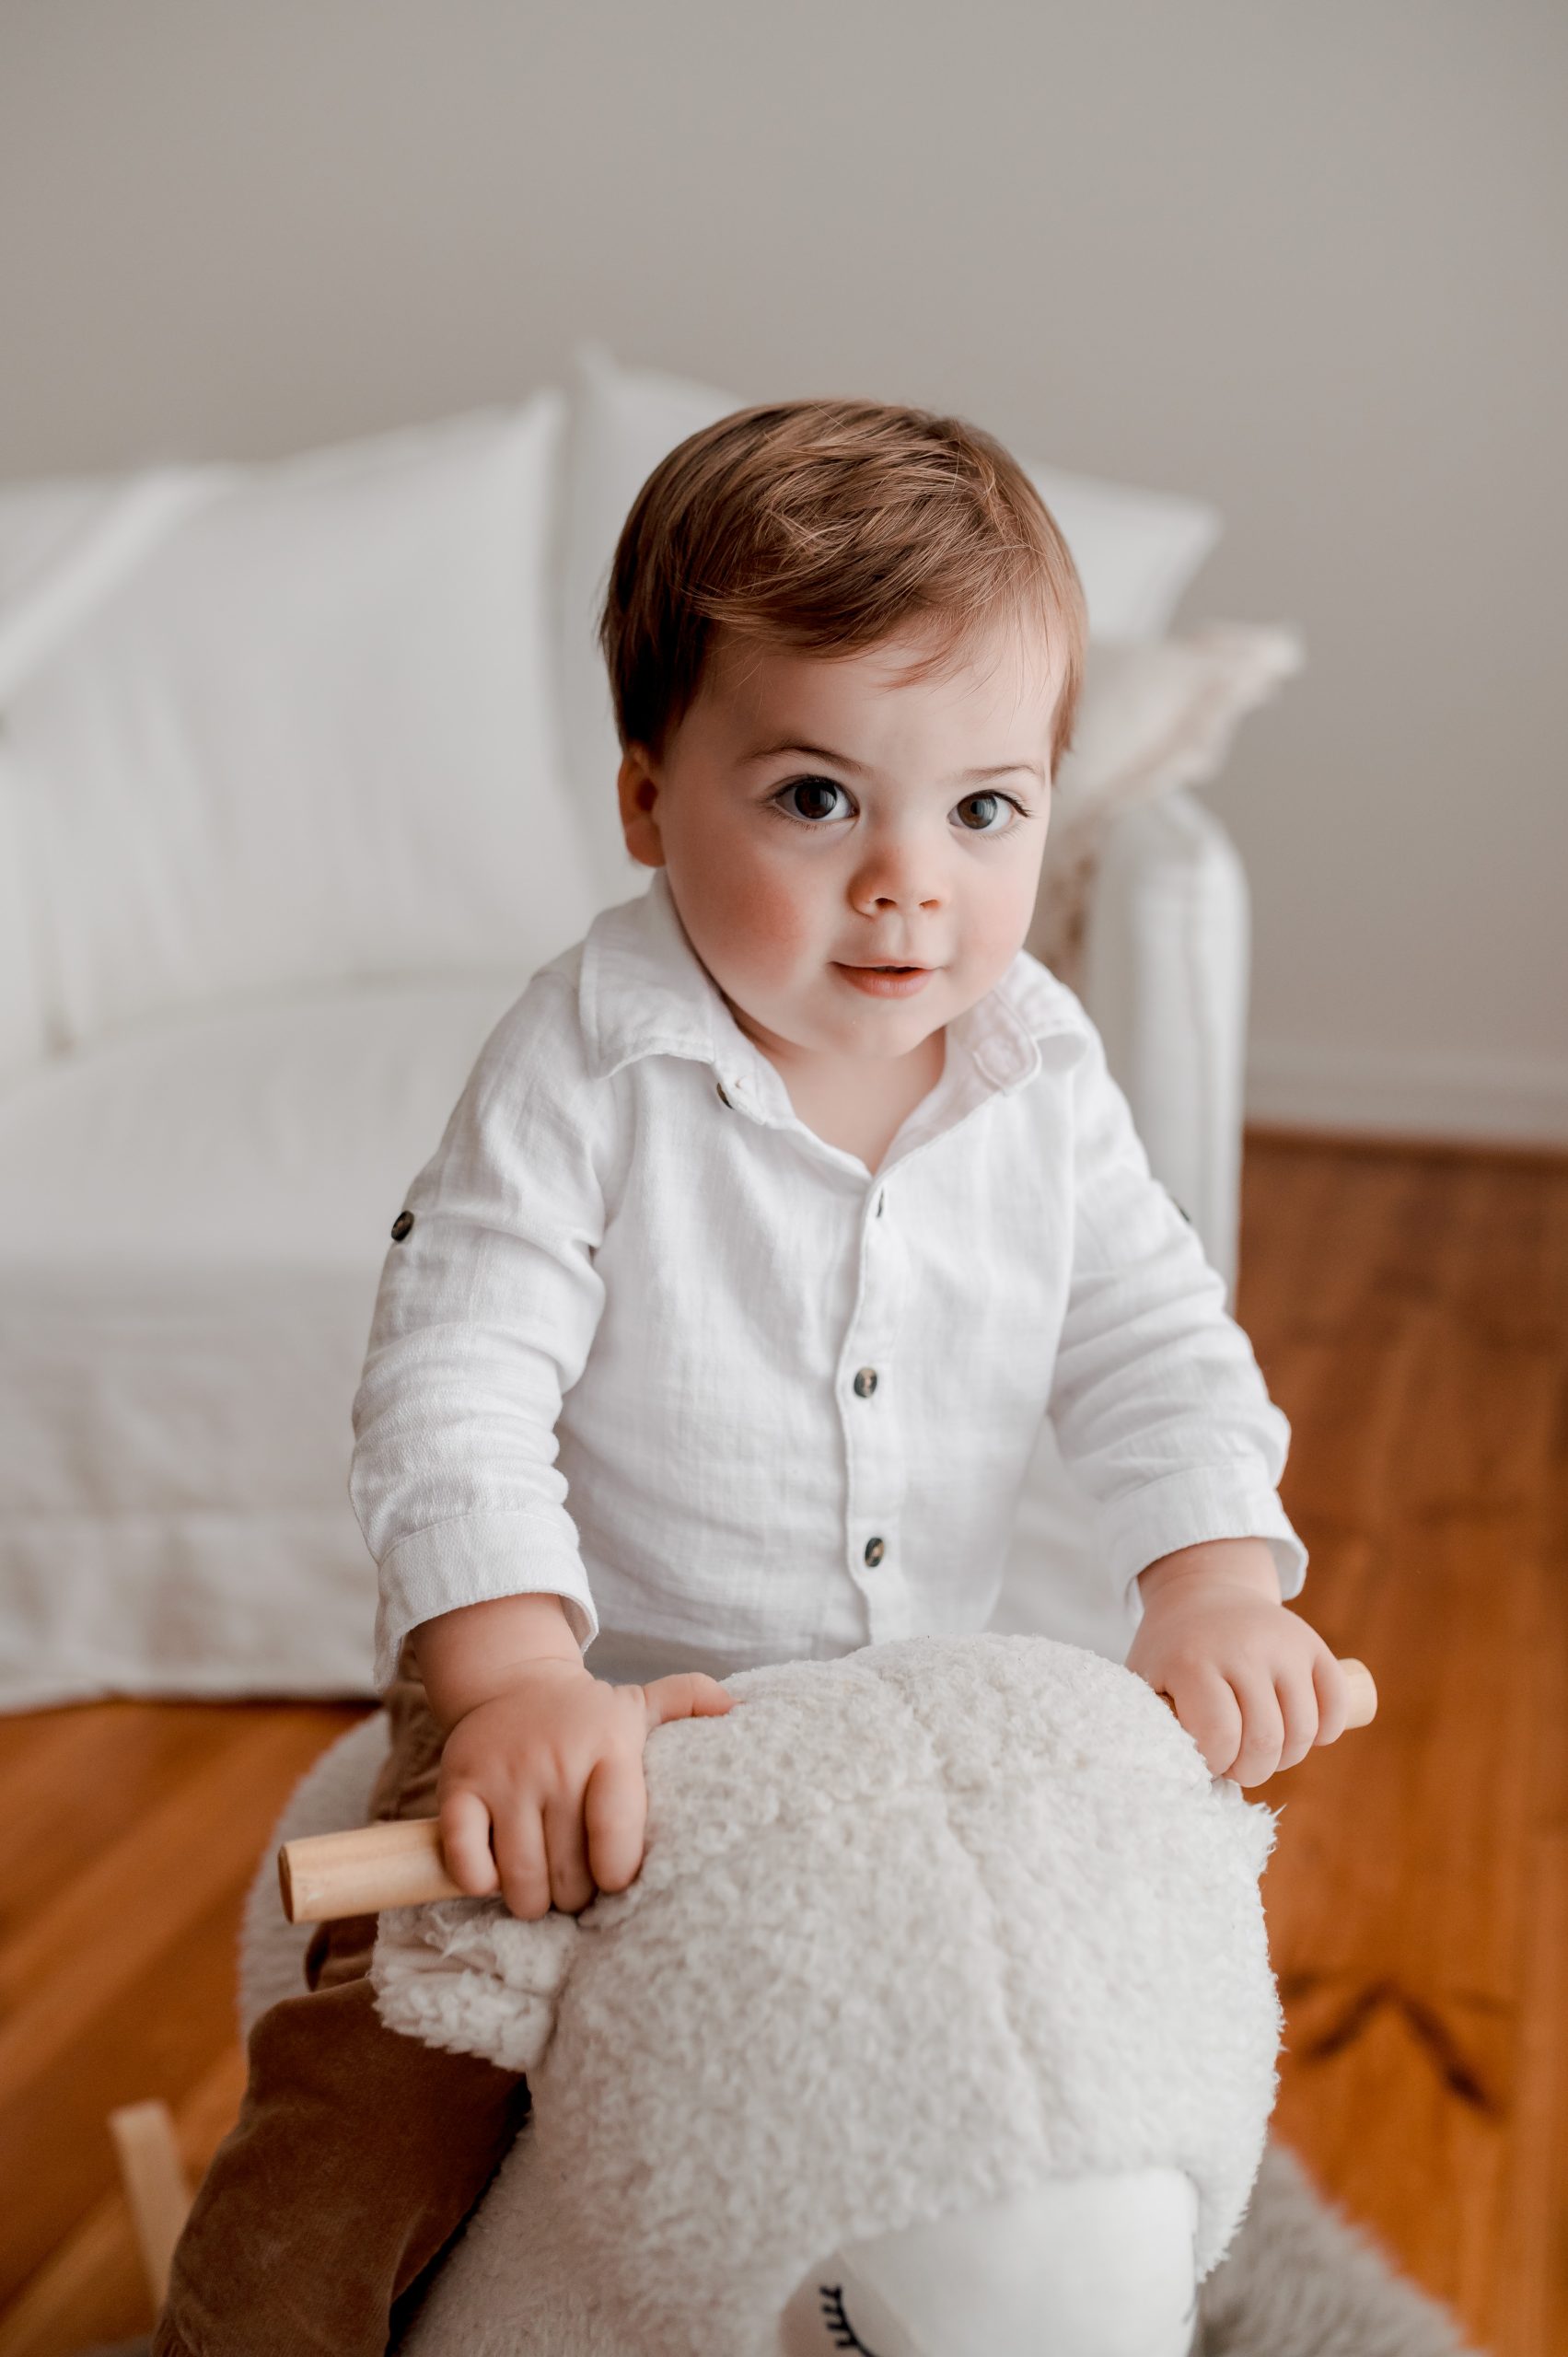 Baby Isaac is nearly 12 months old, he is photographed on a white rocking horse and we wears a white shirt. His big eyes are bright in the lovely natural filtered light.